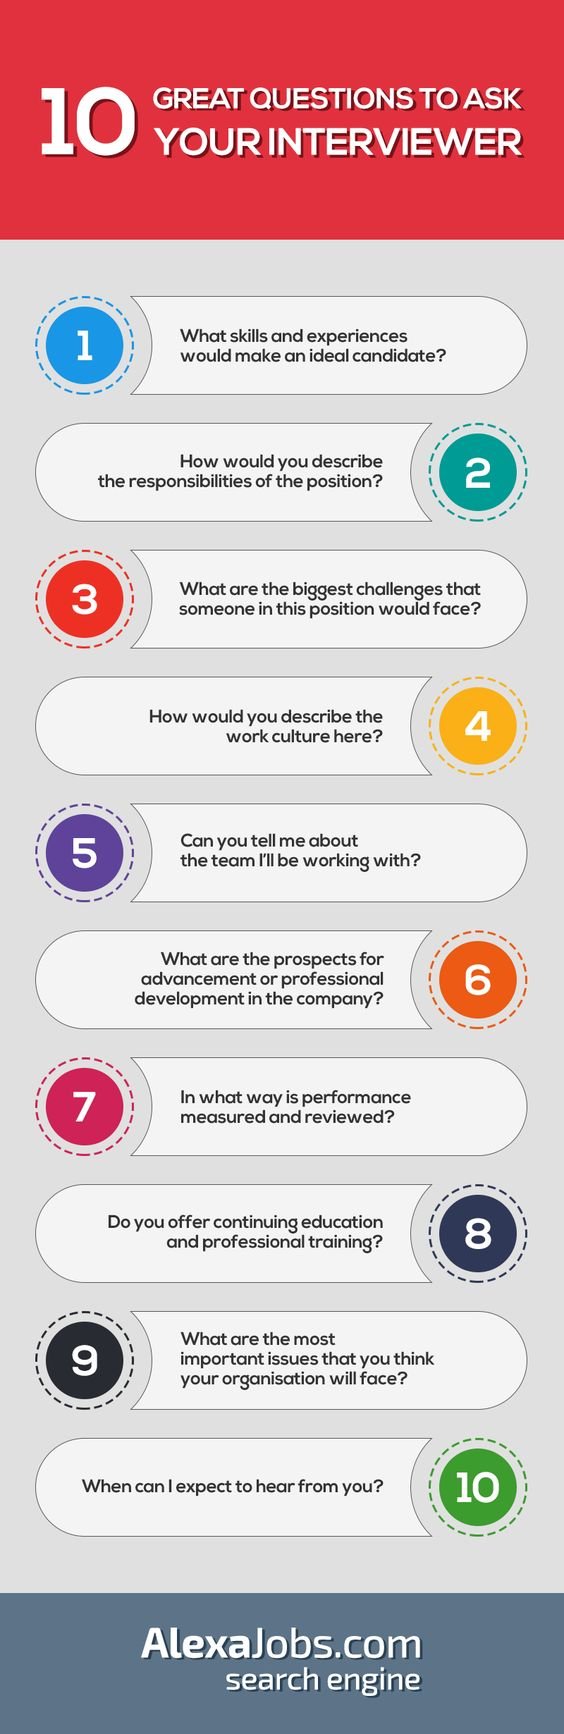 10 great questions to ask your interviewer